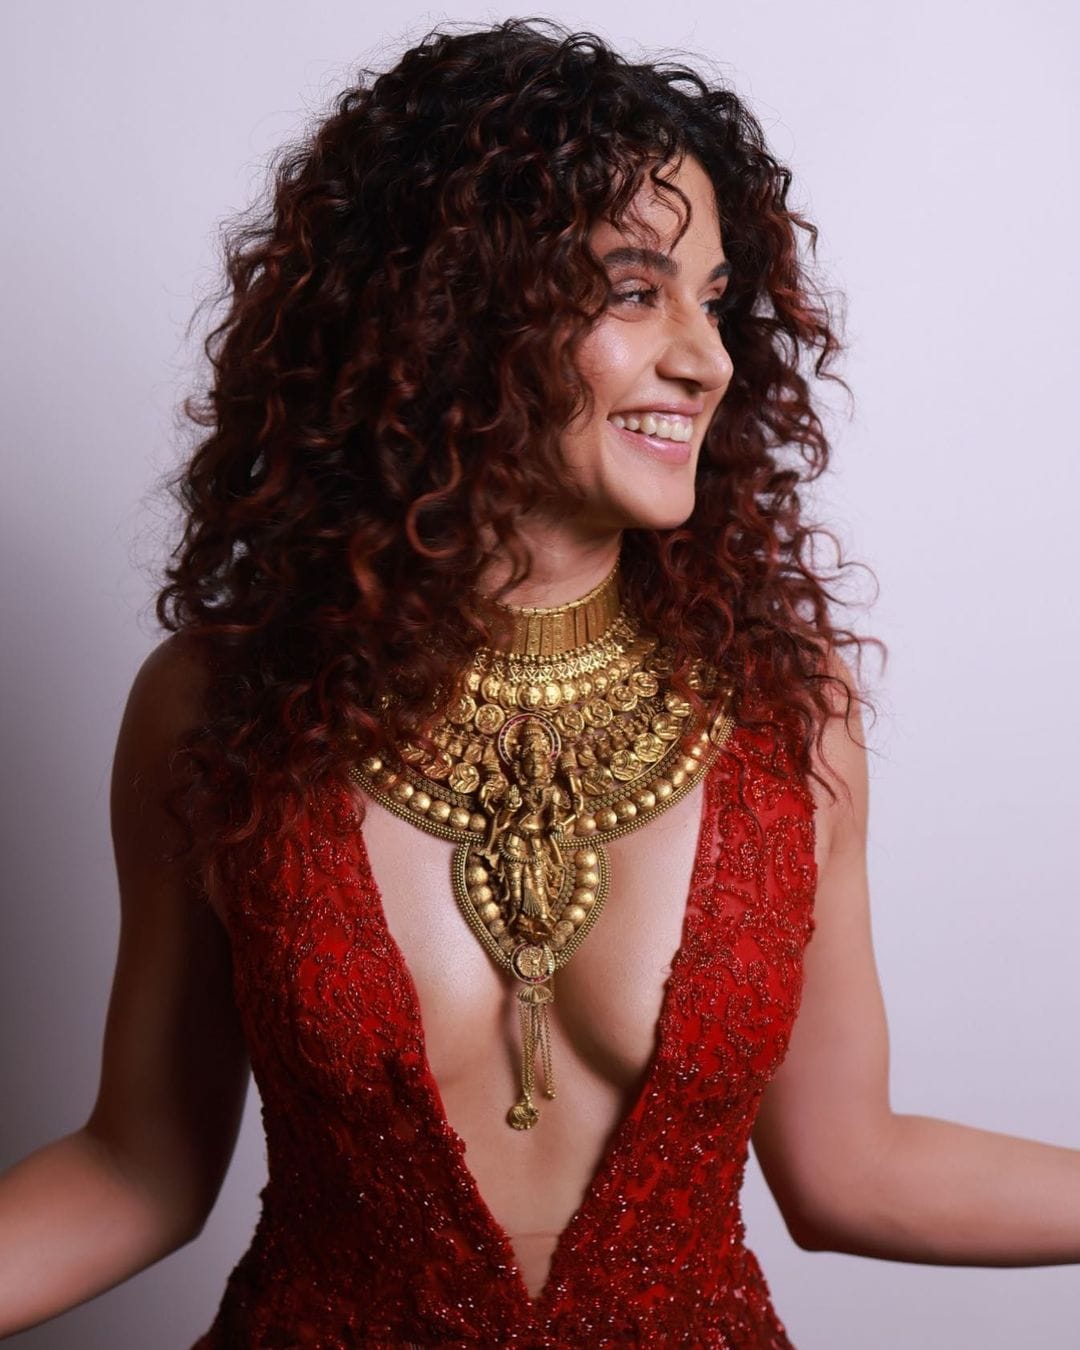 billy talbert recommends taapsee pannu hot pic